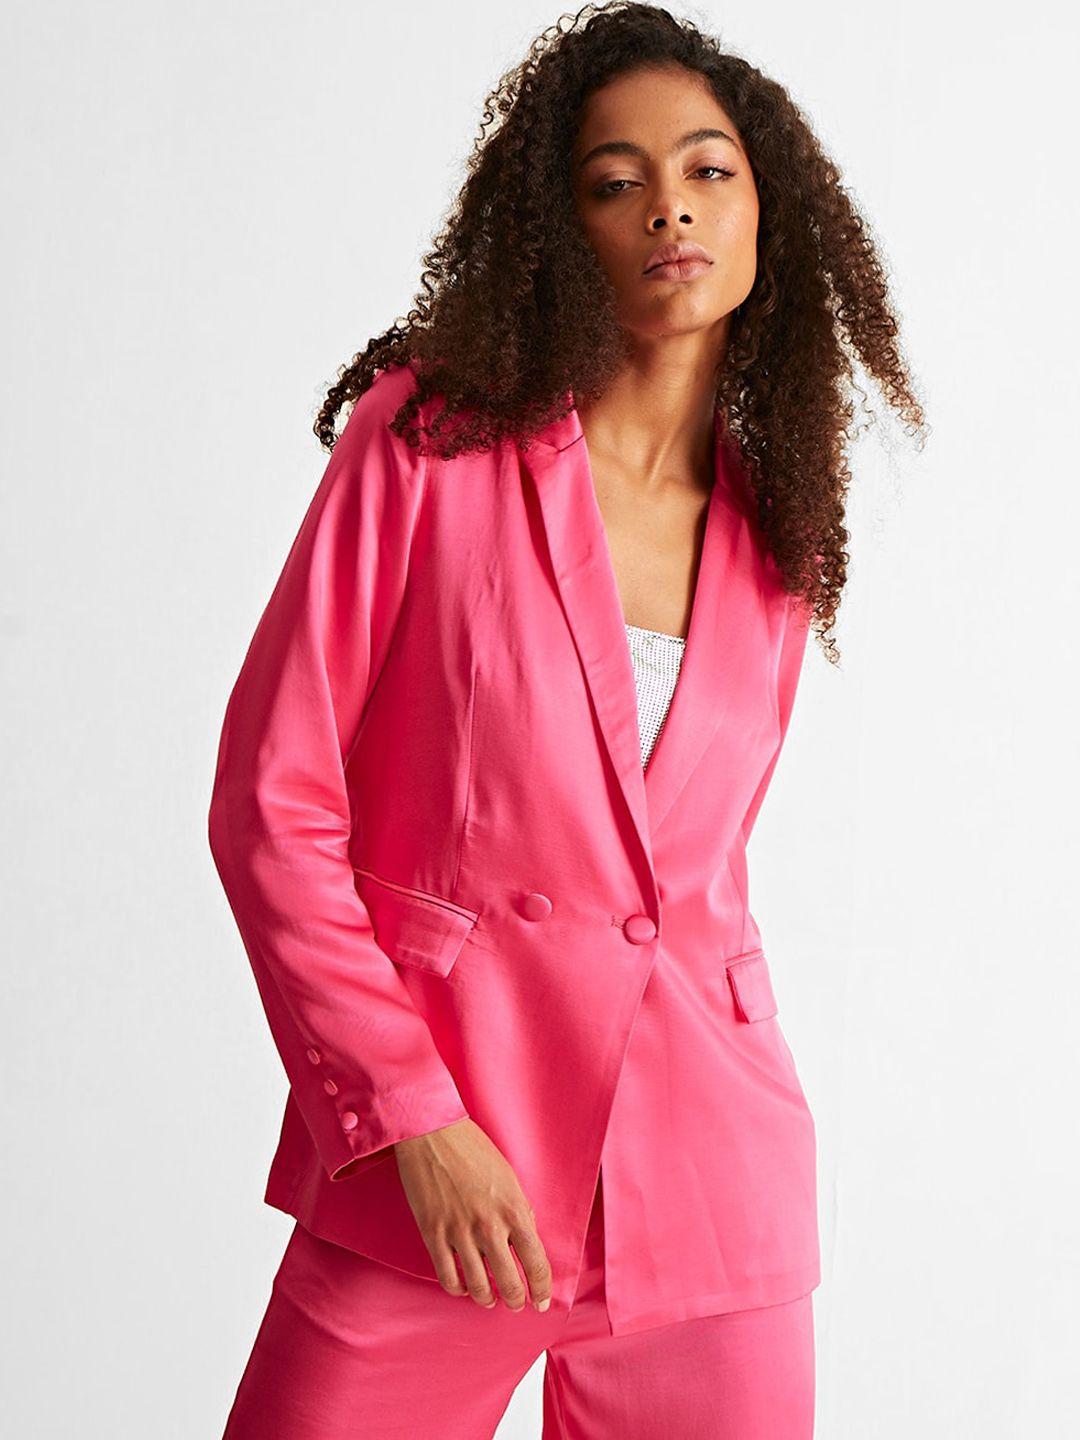 cover story women double-breasted formal blazer